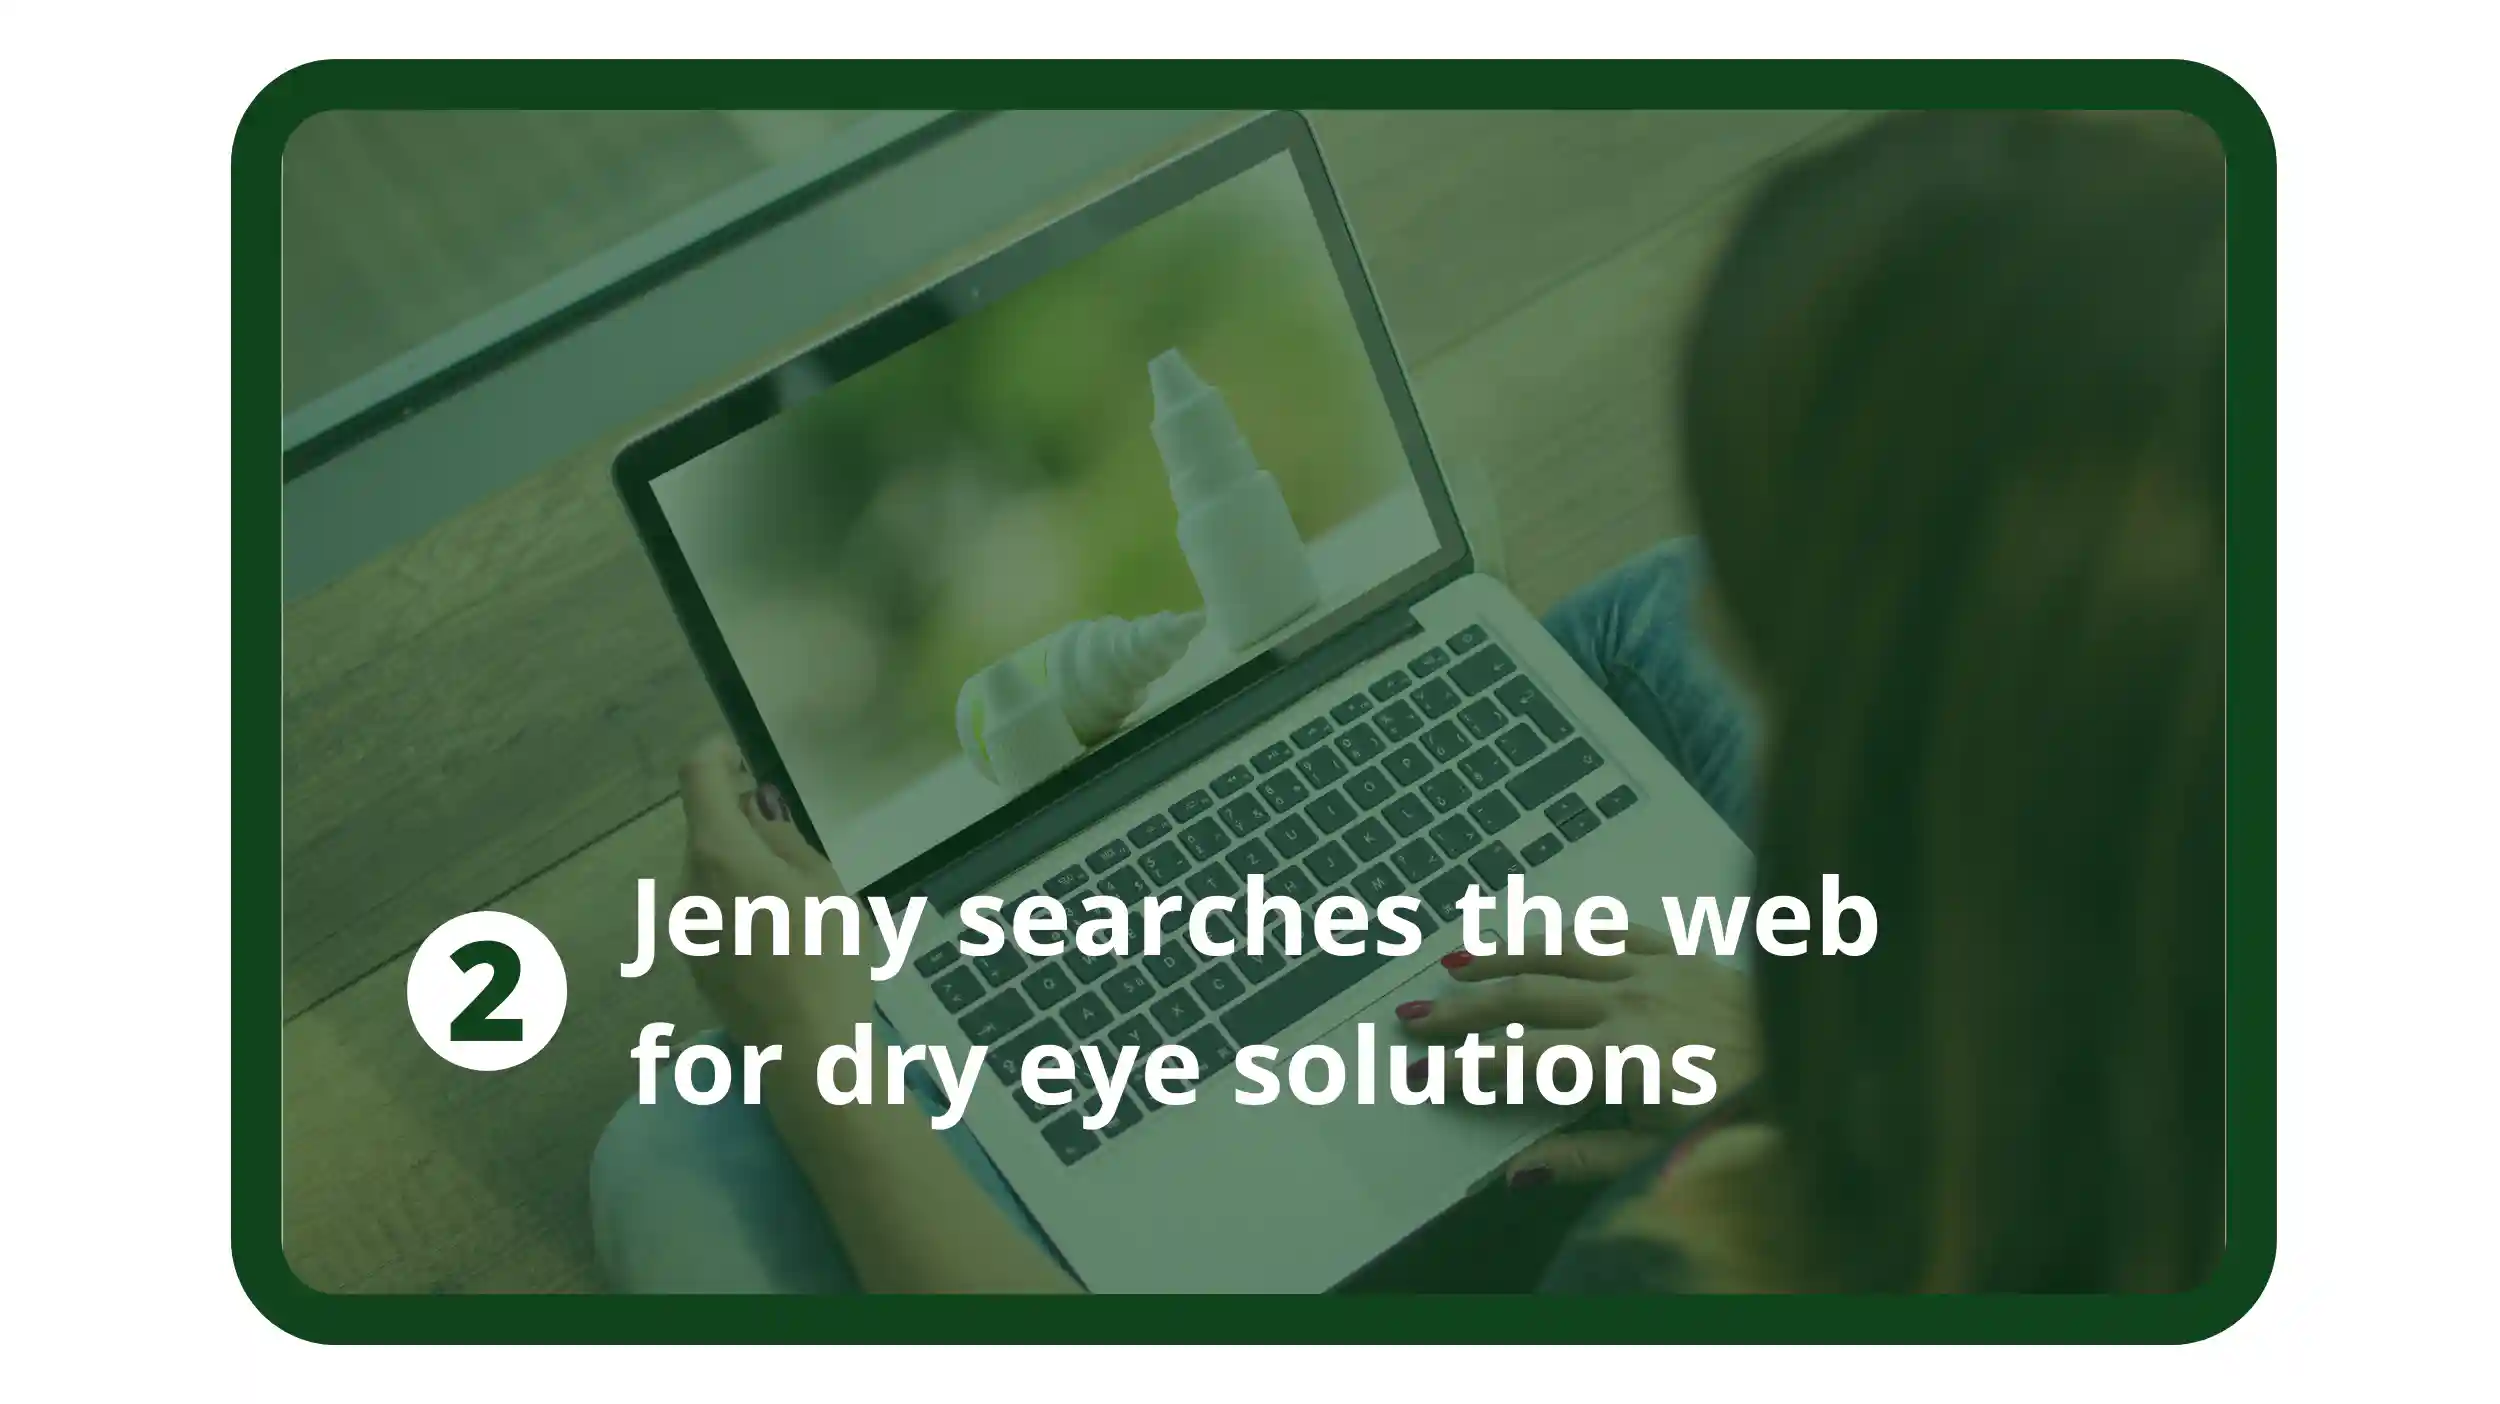 Jenny searches the web for dry eye solutions